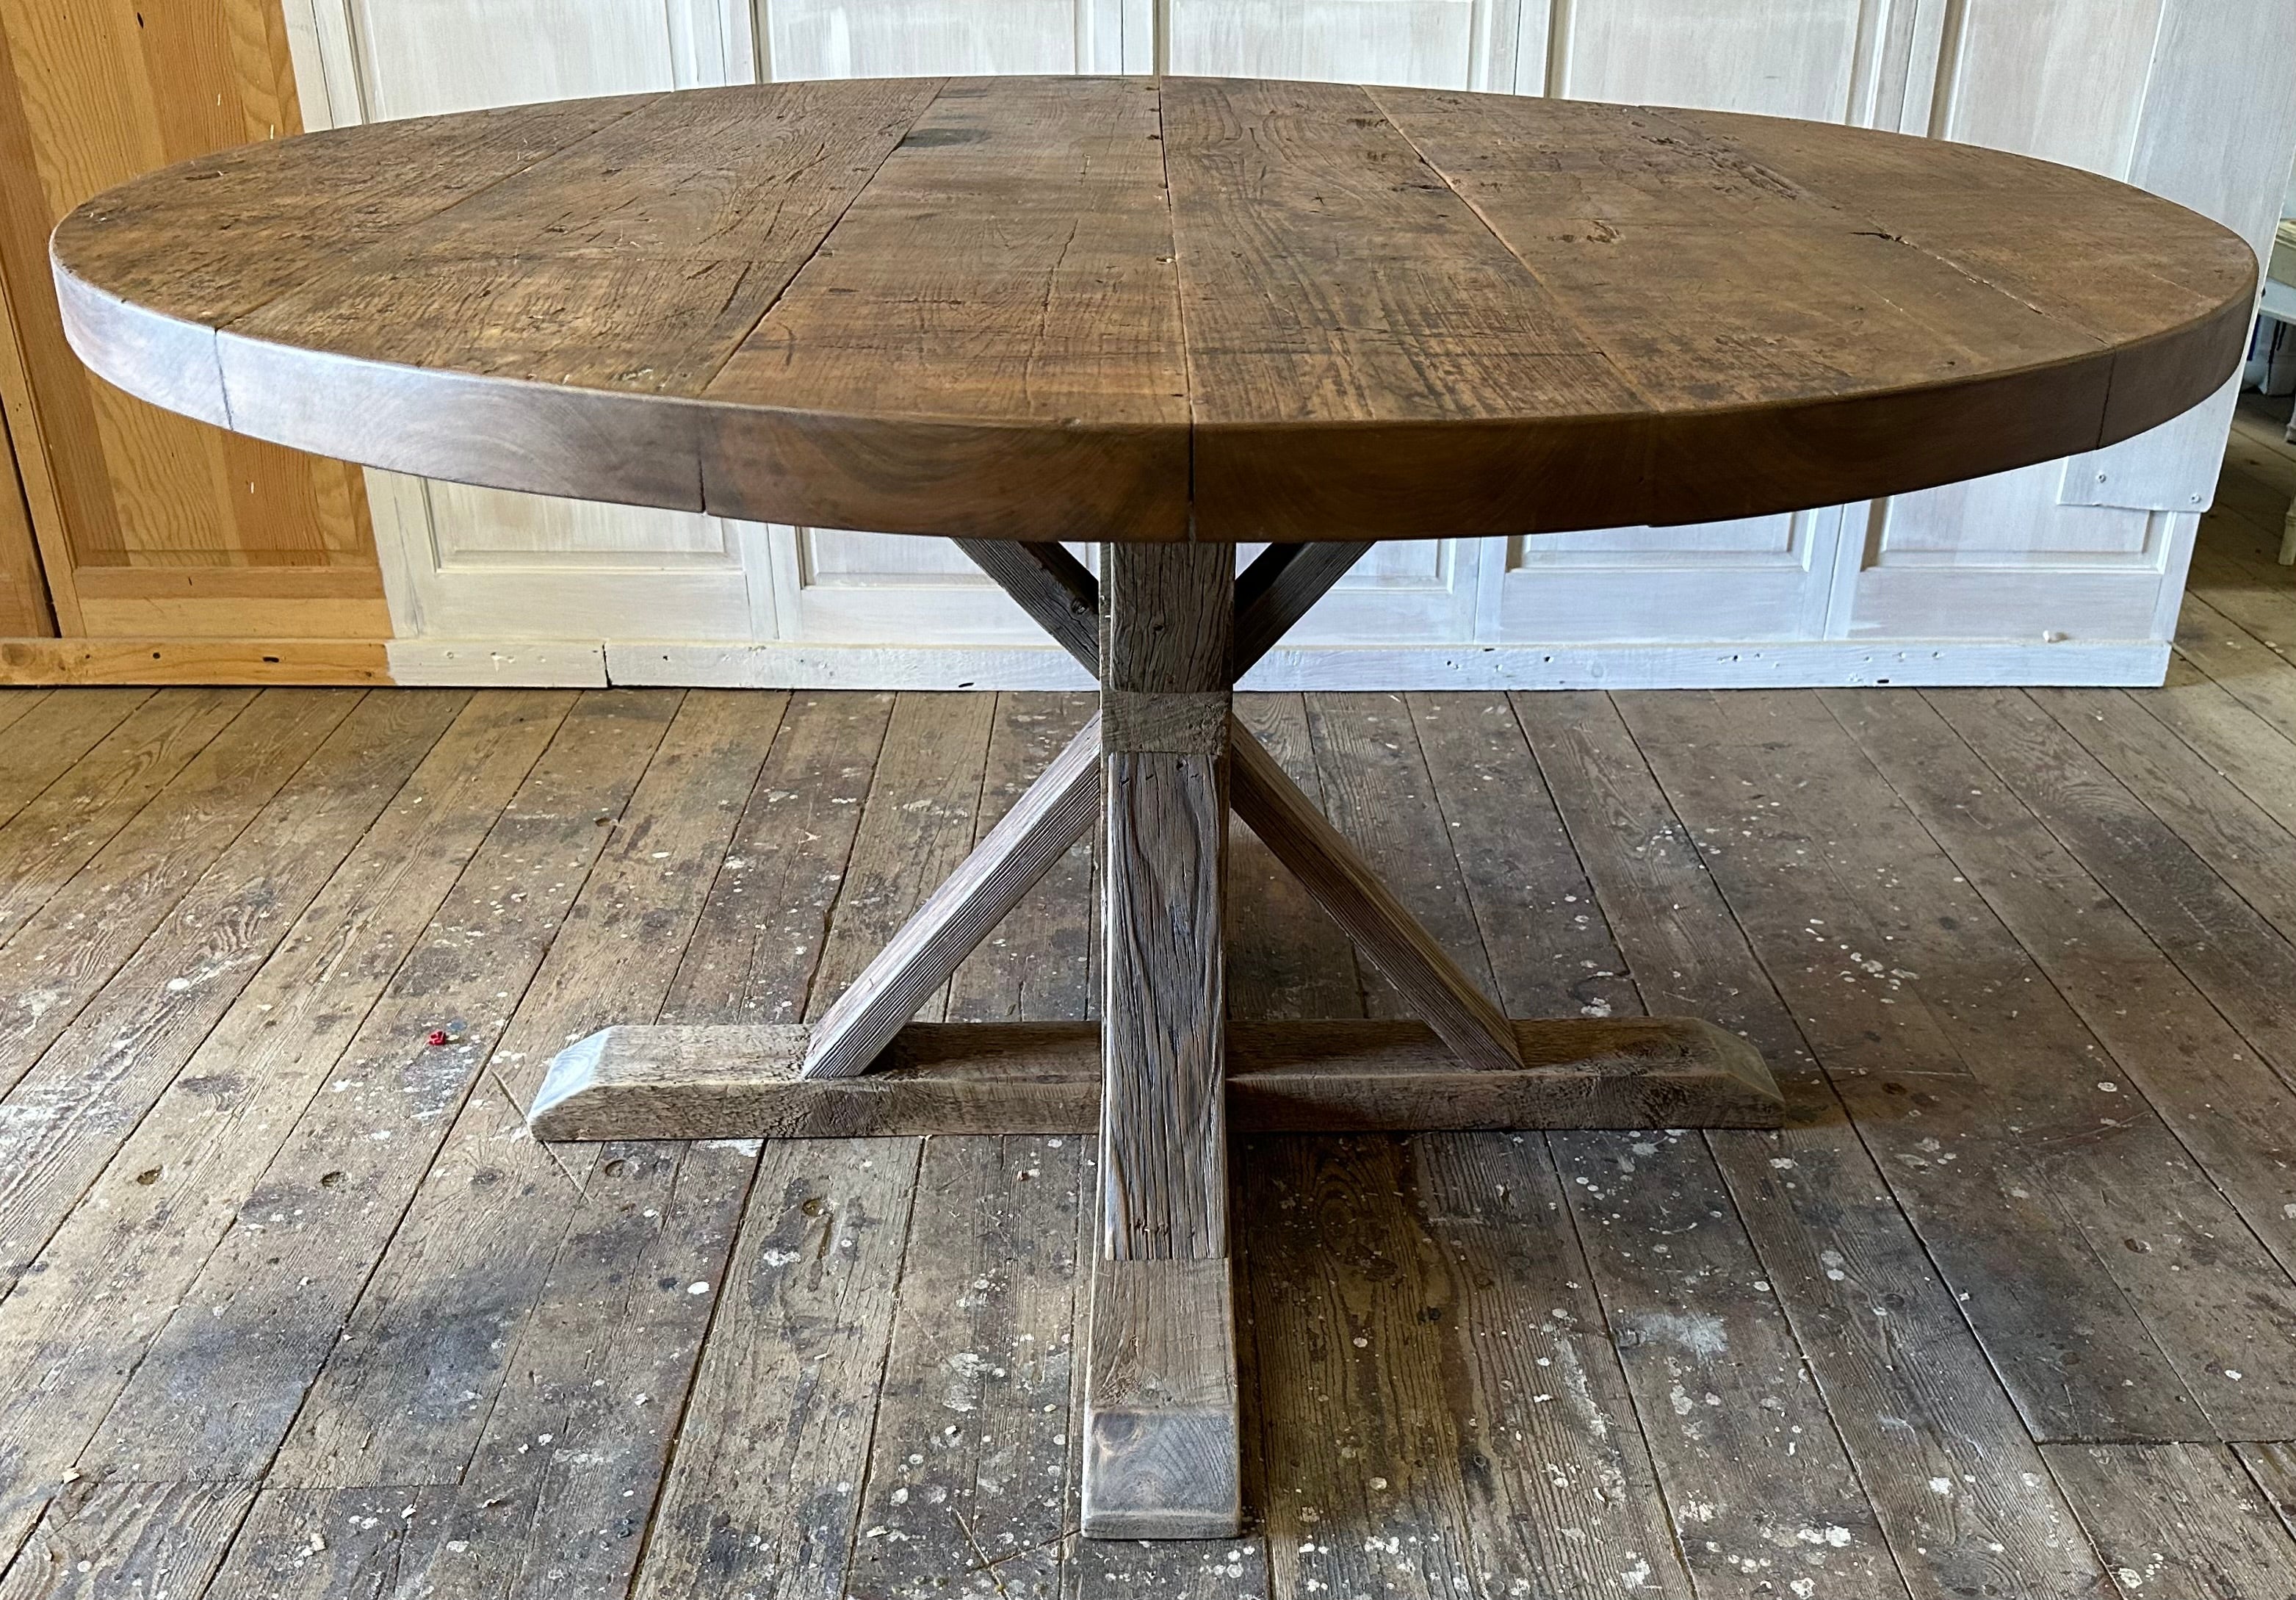 A timeless French inspired round pedestal farmhouse table made with reclaimed walnut table top and a newly crafted natural colored wood table base.  The table makes a perfect addition to any kitchen or dining room.  Natural and rustic in appearance,